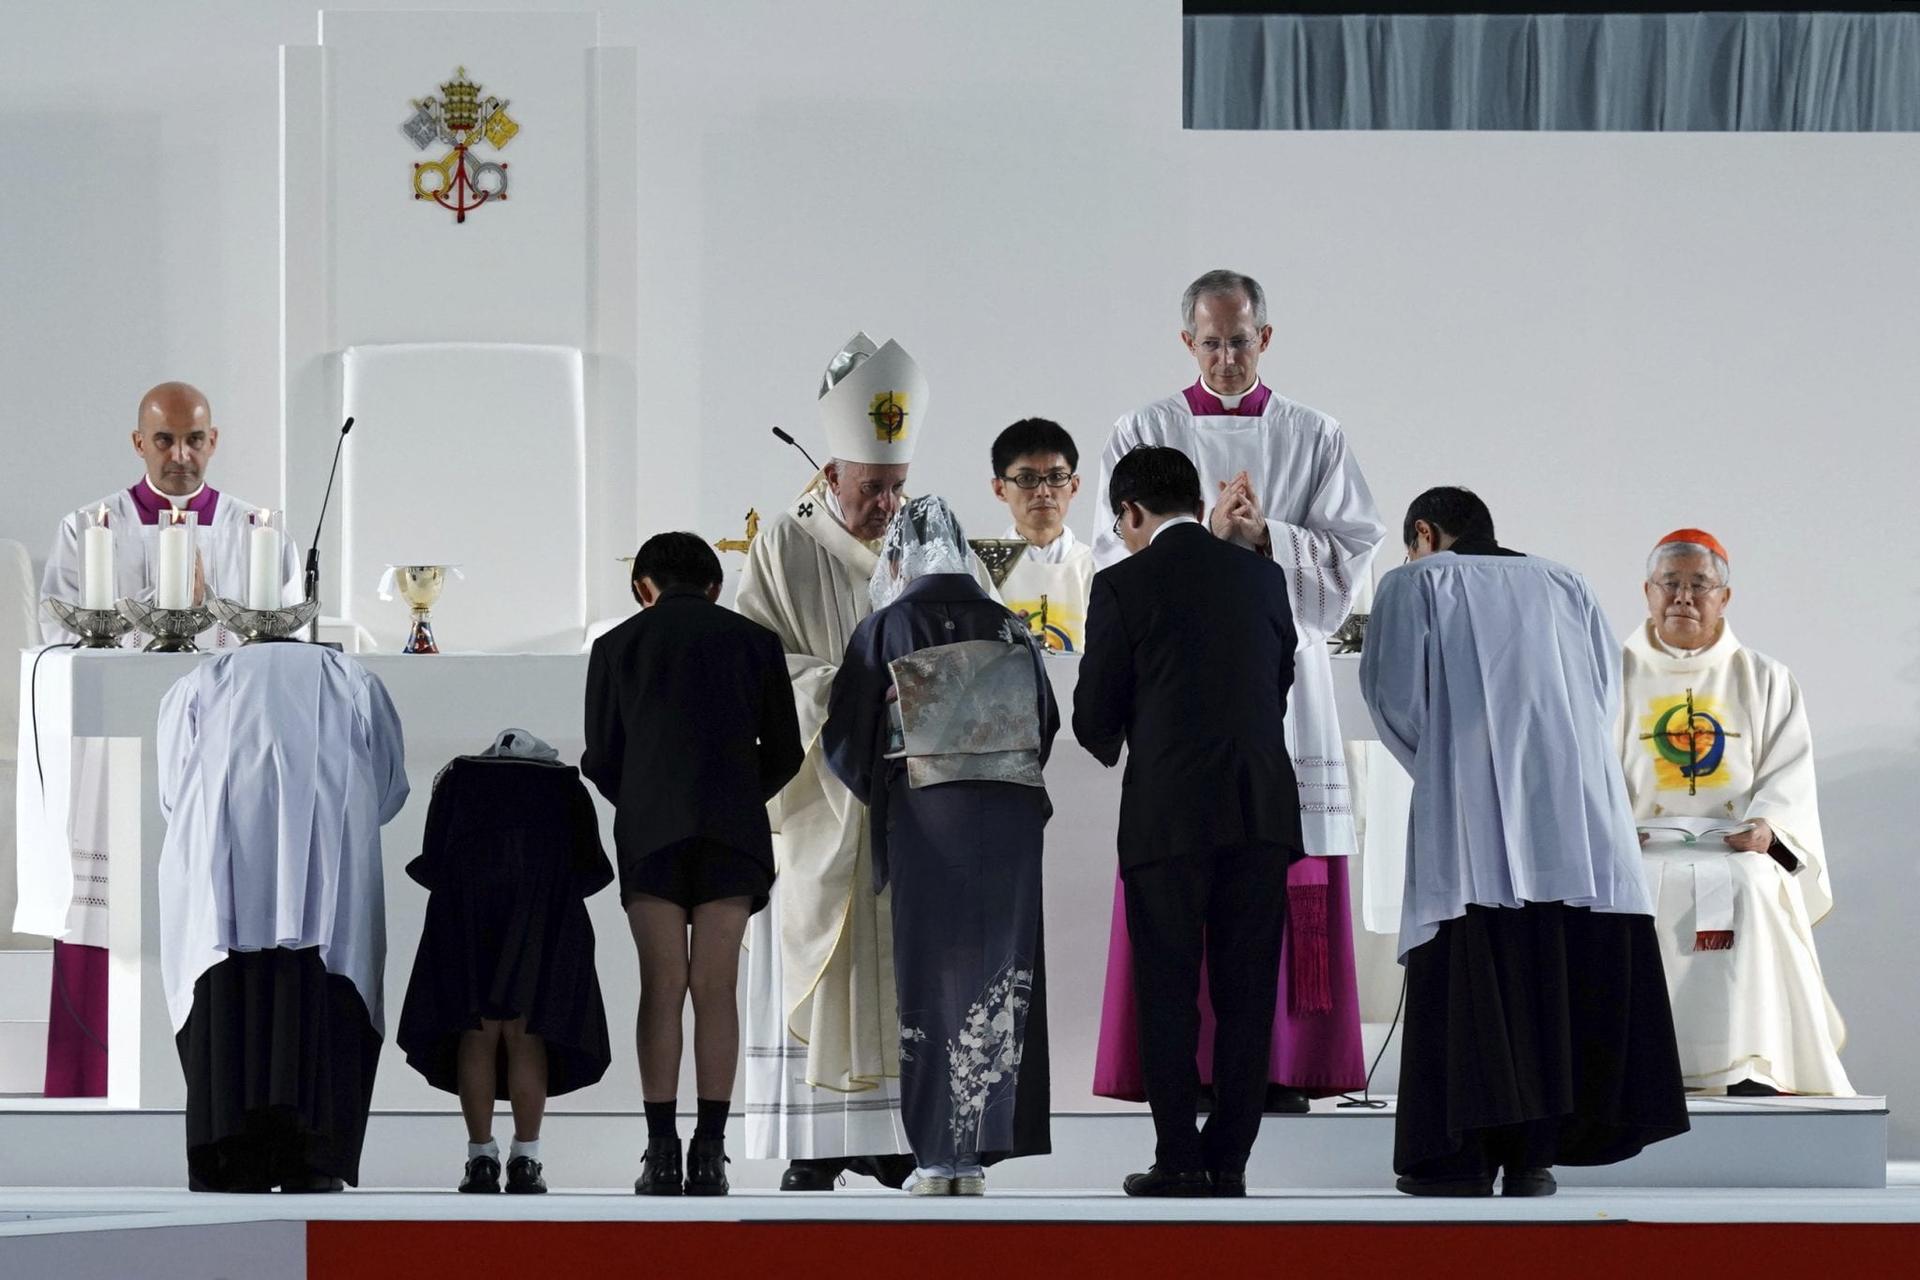 Powerful nations protect all life, pope says in Japan